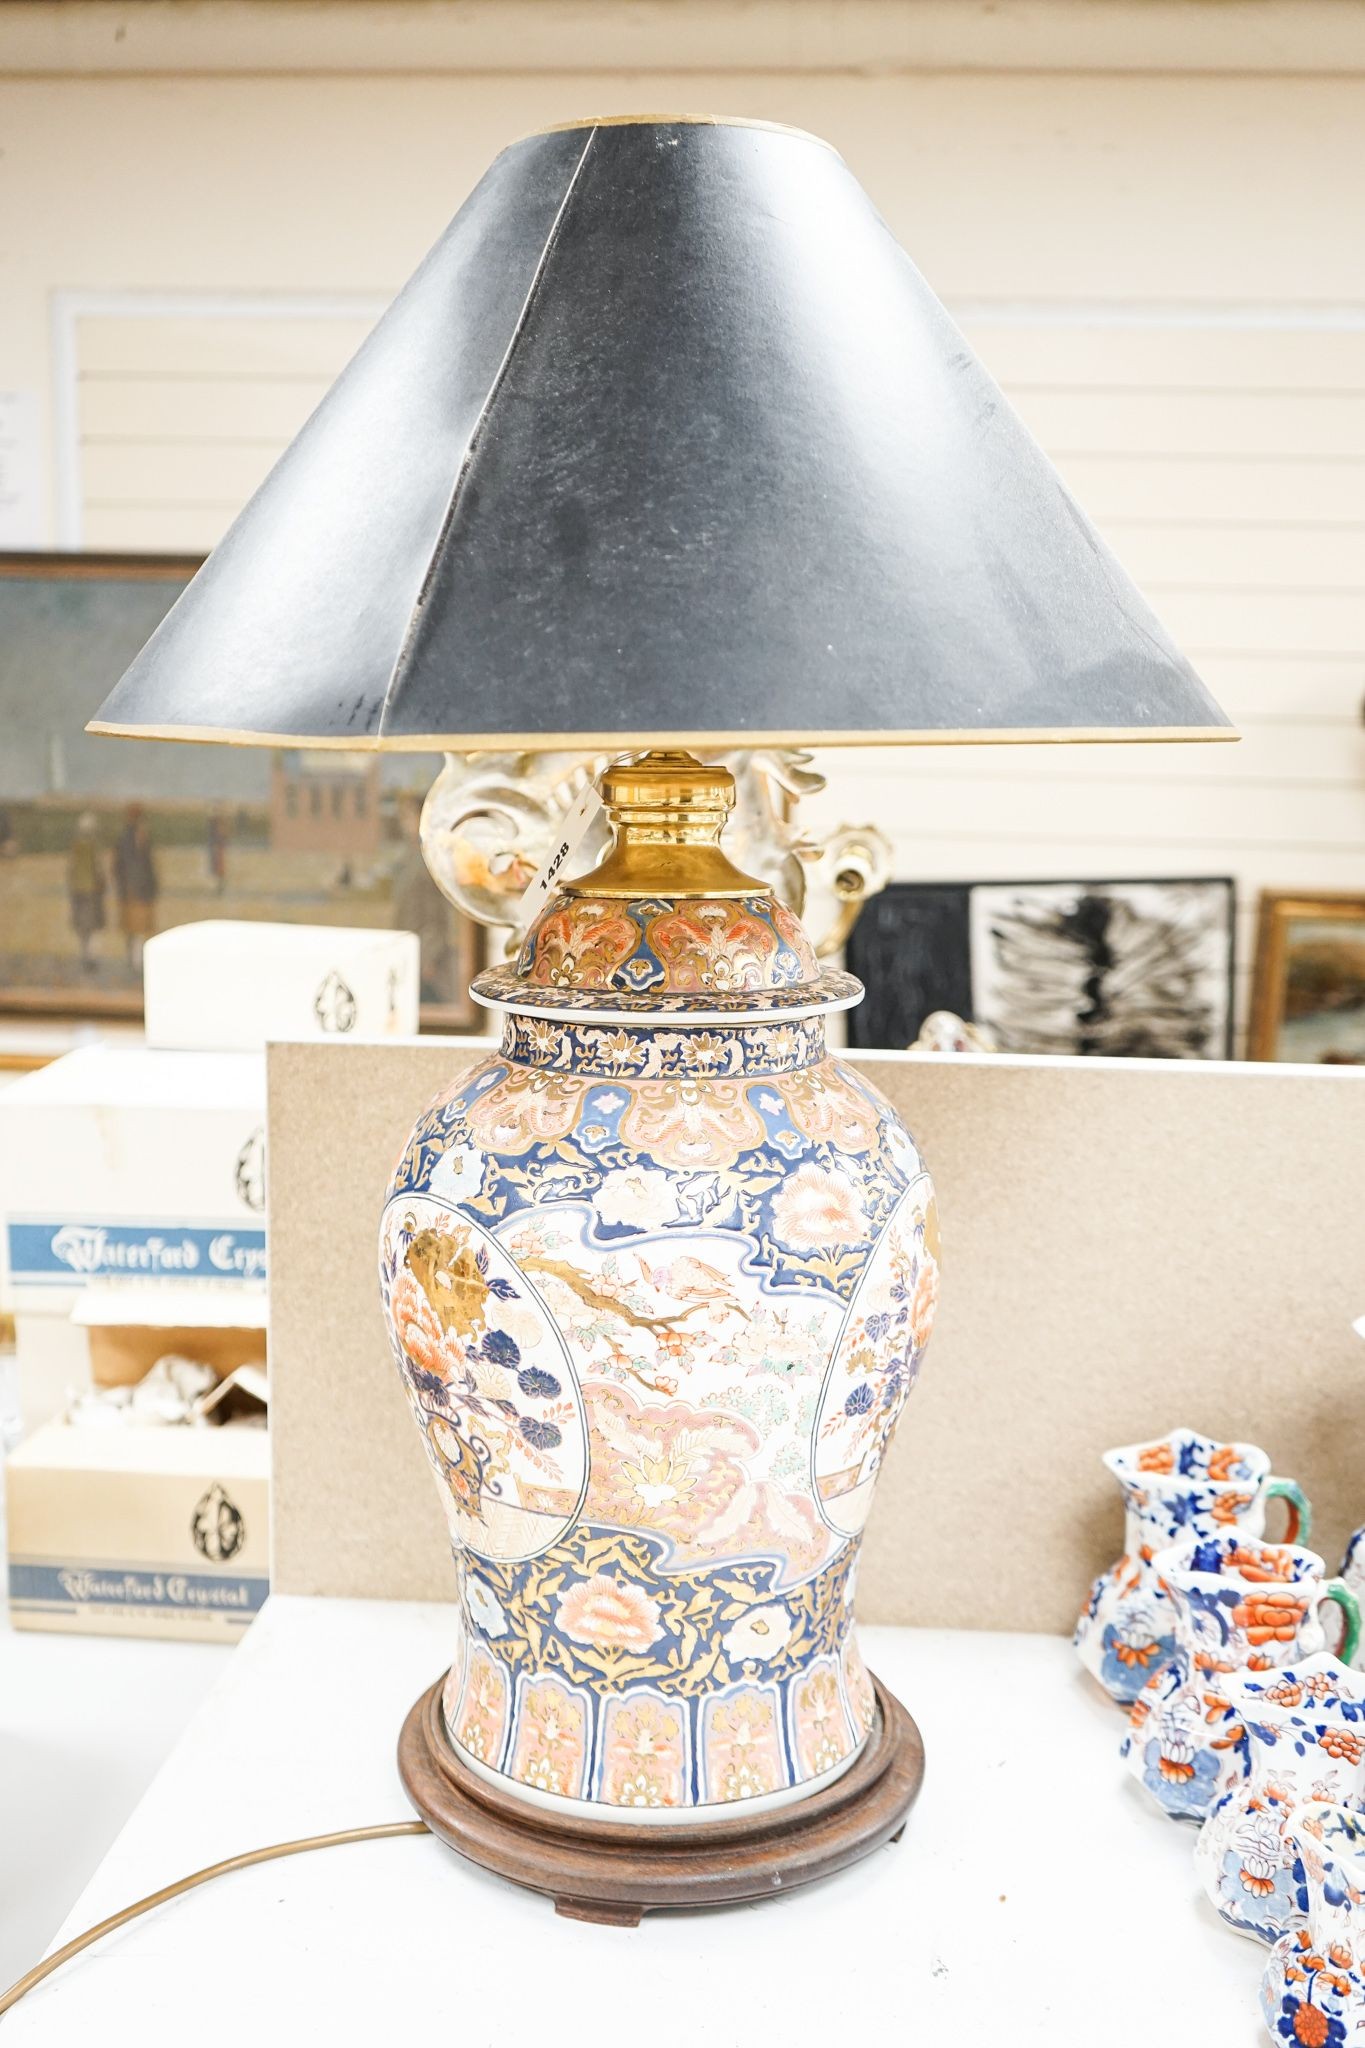 A Chinese Imari style vase converted to a lamp